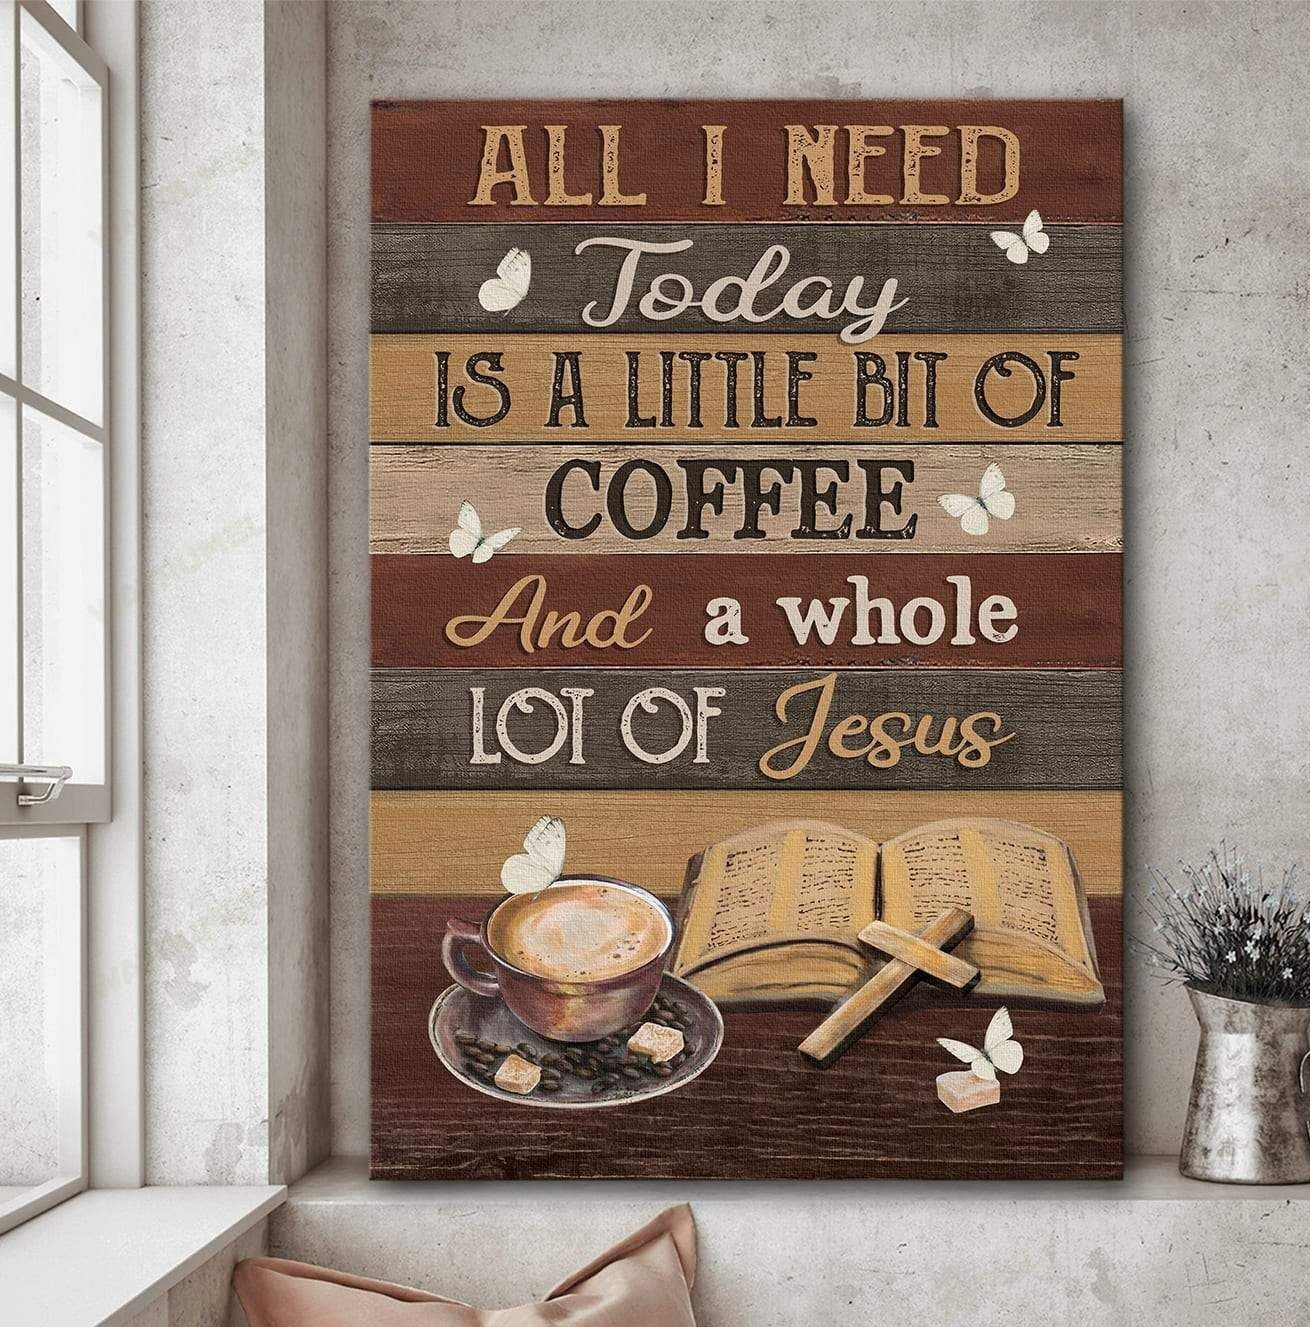 Need Is Coffee And A Whole Lot Of Jesus Home Poster Canvas Home Decoration Gift For Men Women Father Mother